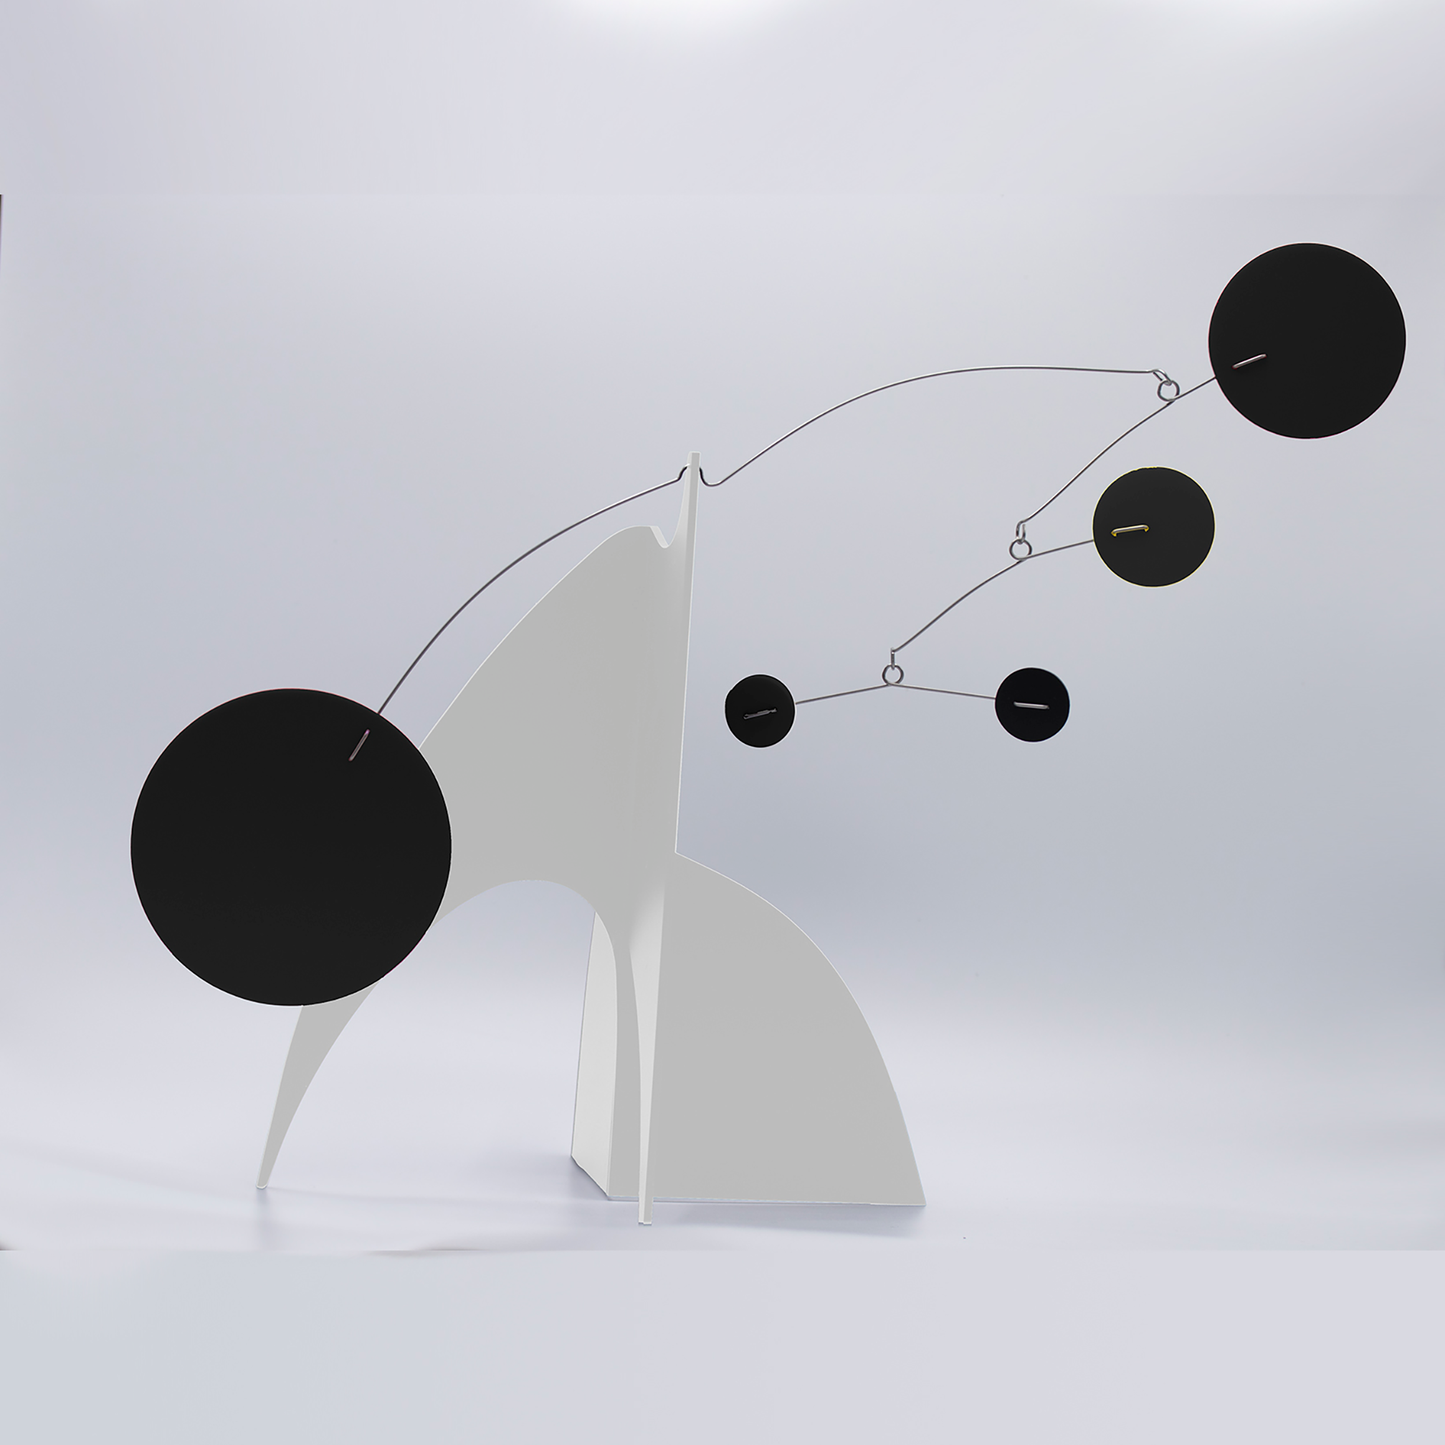 Beautiful Moderne Art Stabile in modernist minimalist colors of white and black - mid century modern inspired abstract modern art - tabletop kinetic art sculpture mobiles hand made with glossy plexiglass acrylic in Los Angeles by Debra Ann of AtomicMobiles.com